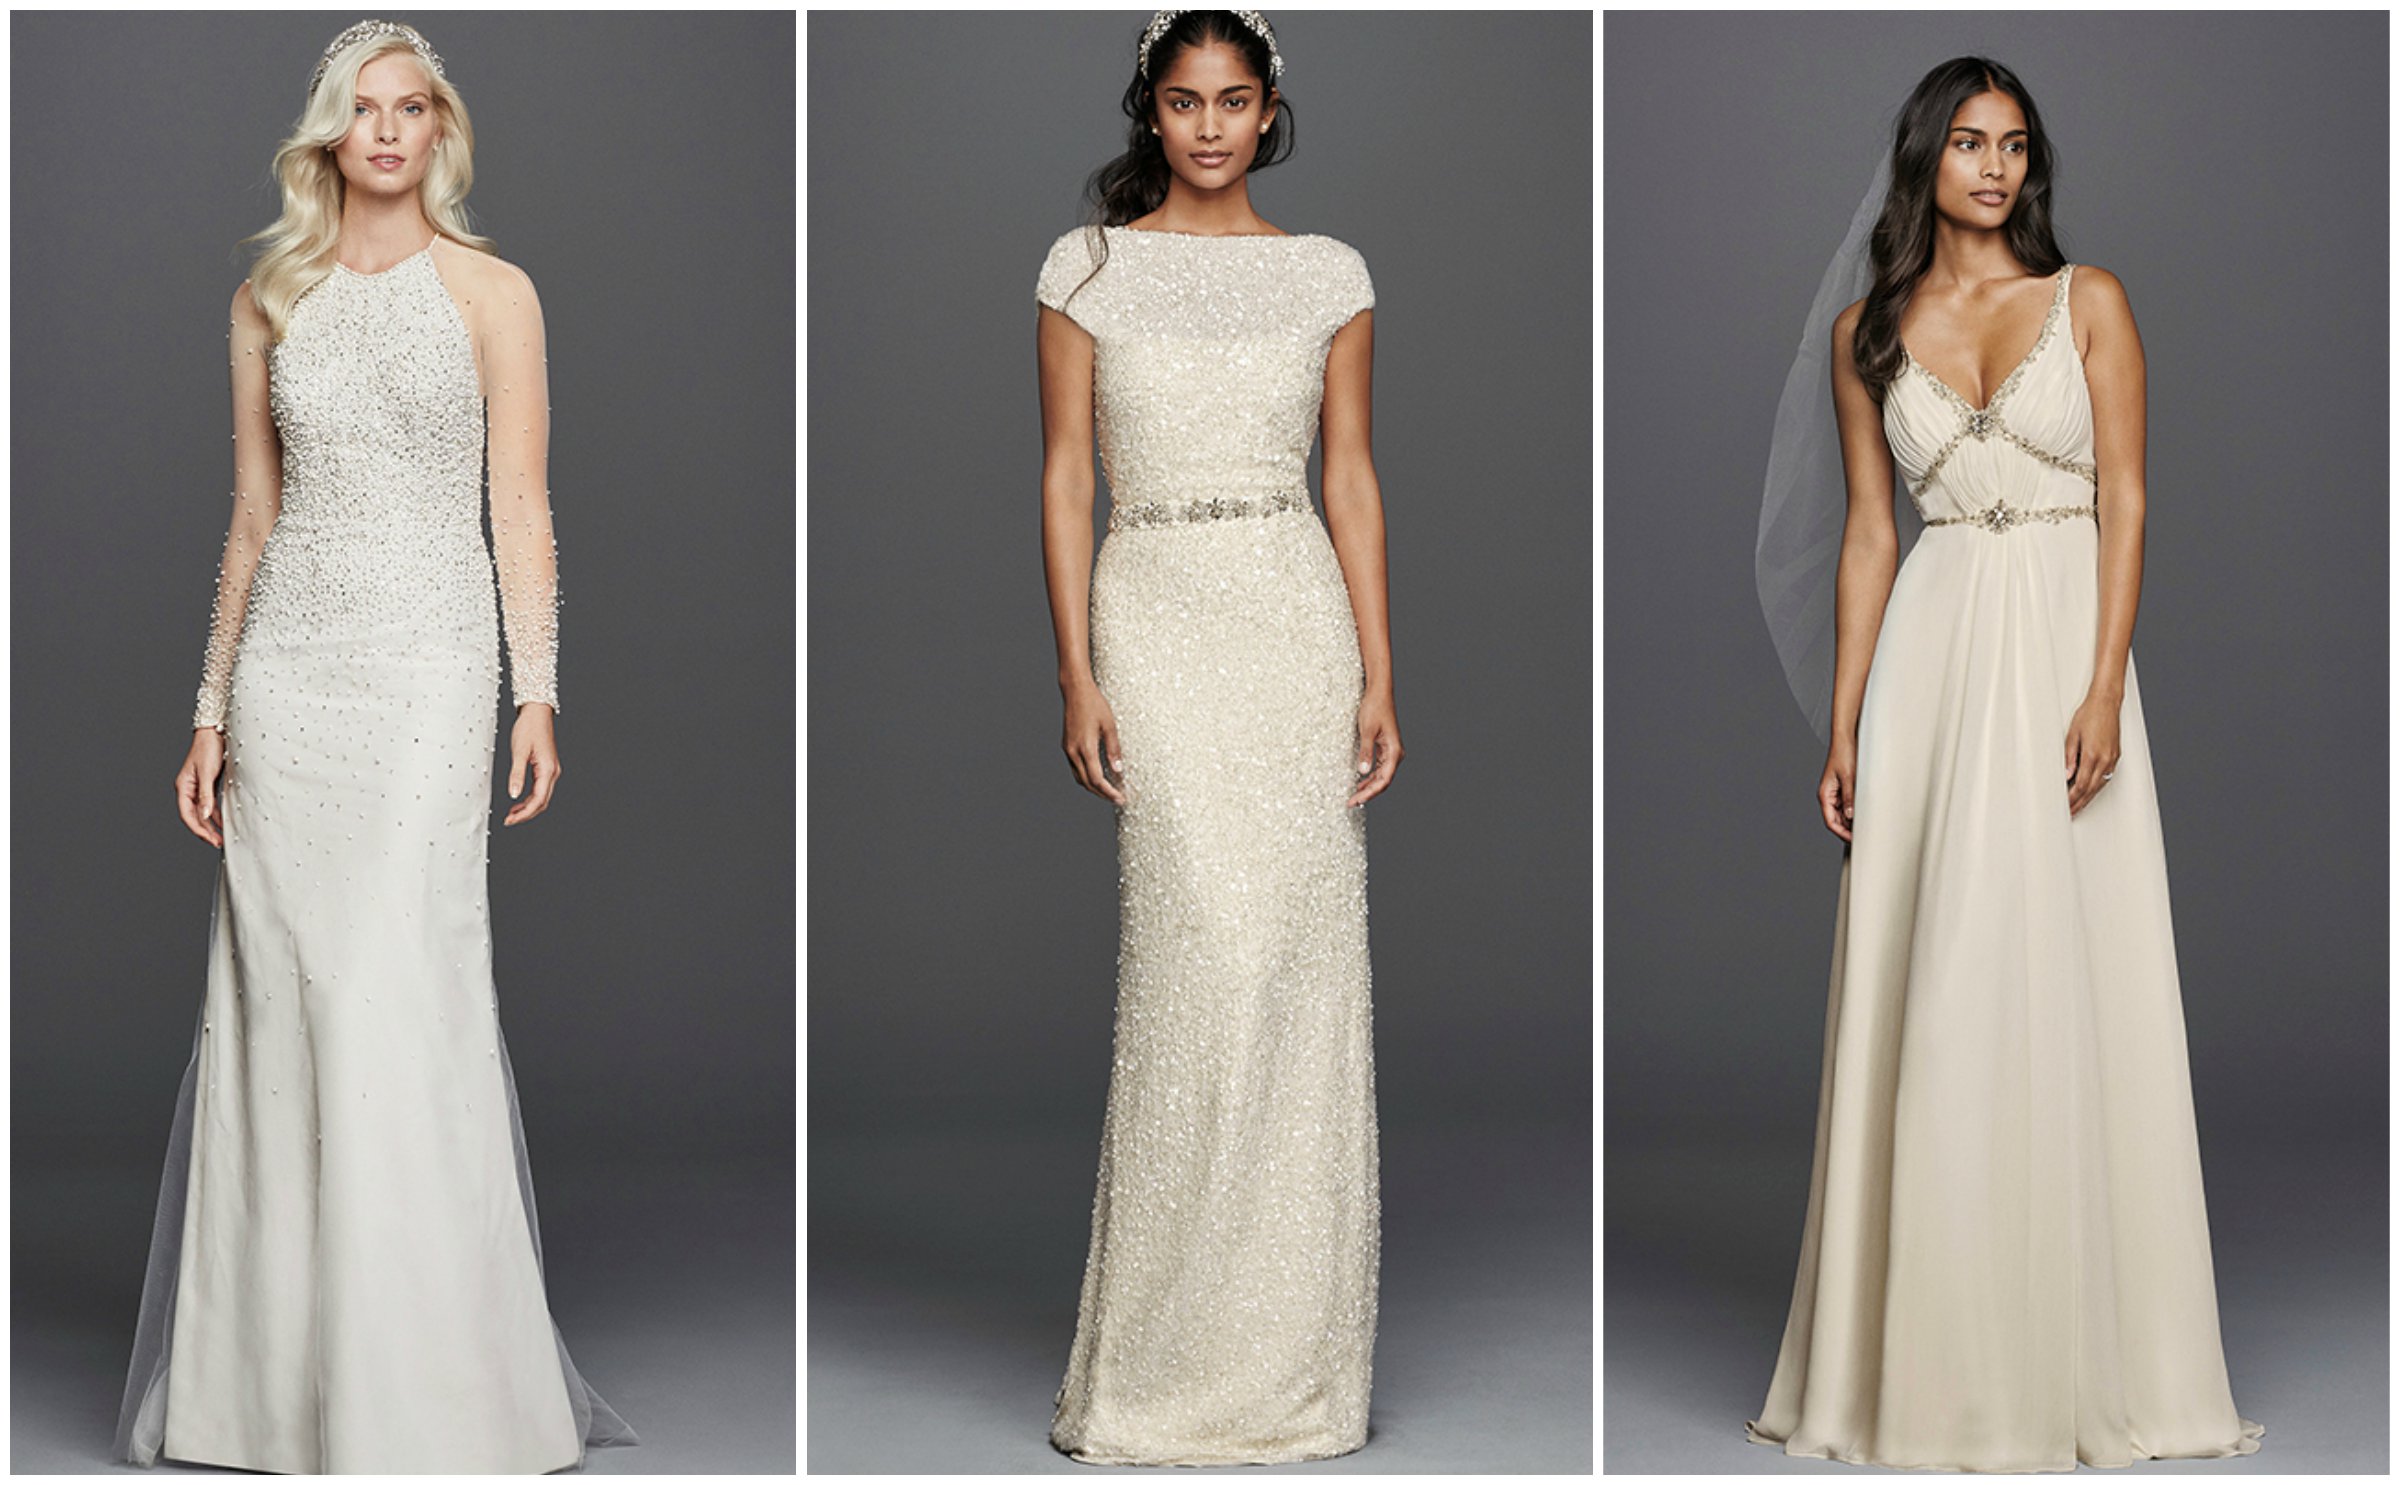 Jenny Packham for David's Bridal, Come See the Entire Collection: Wedding  Dresses and More